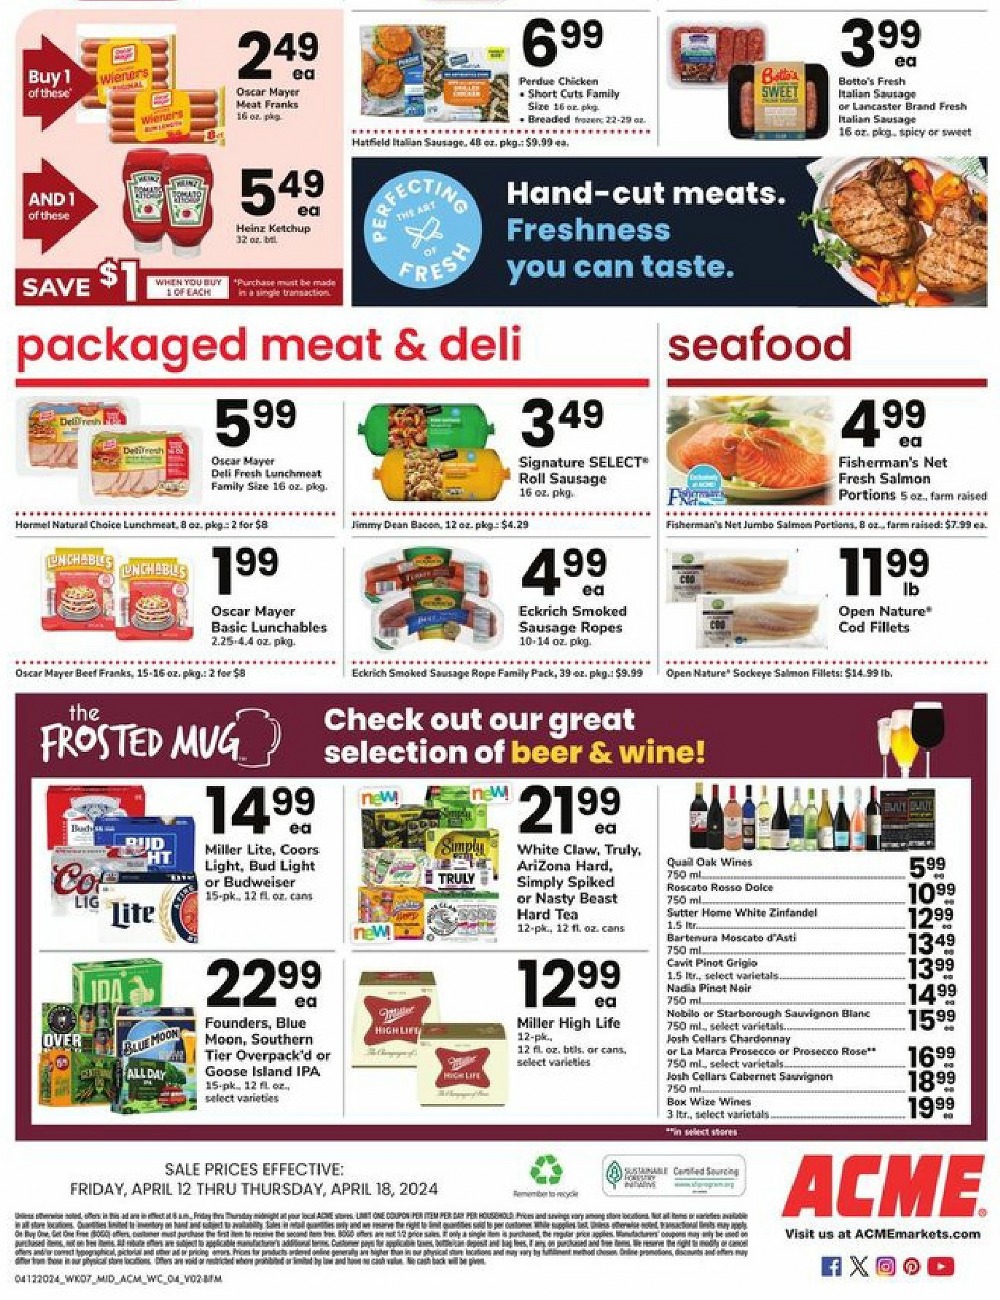 Acme Weekly Ad April 12 to April 18 2024 6 – acme ad 7 4